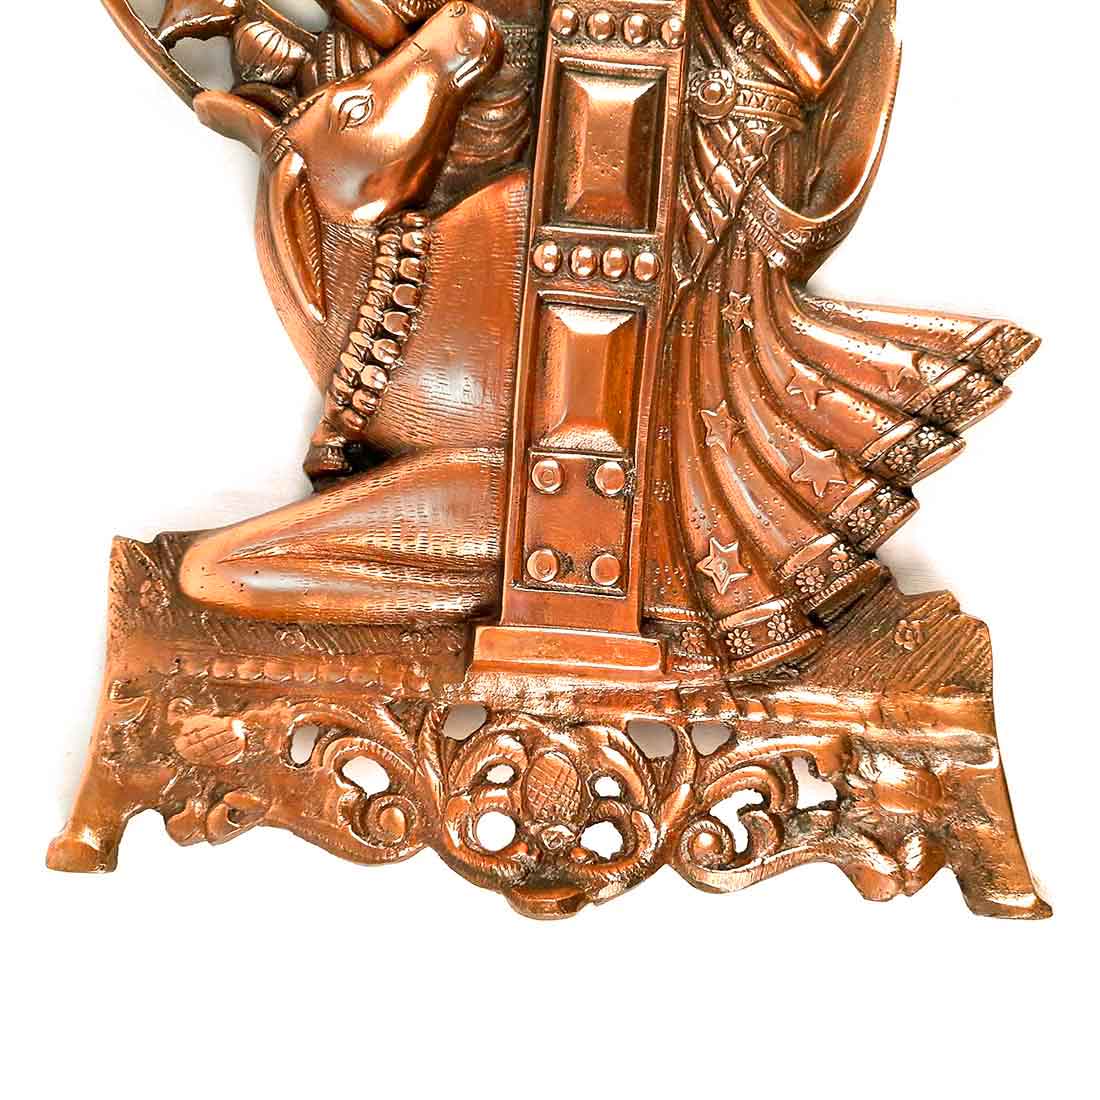 Radha Krishna Wall Hanging Idol | Shri Radha Krishna Playing Flute With Cow Wall Hanging Art Statue Murti | Religious & Spiritual Sculpture - for Gift, Home, Living Room, Office, Puja Room Decoration  - 21 Inch